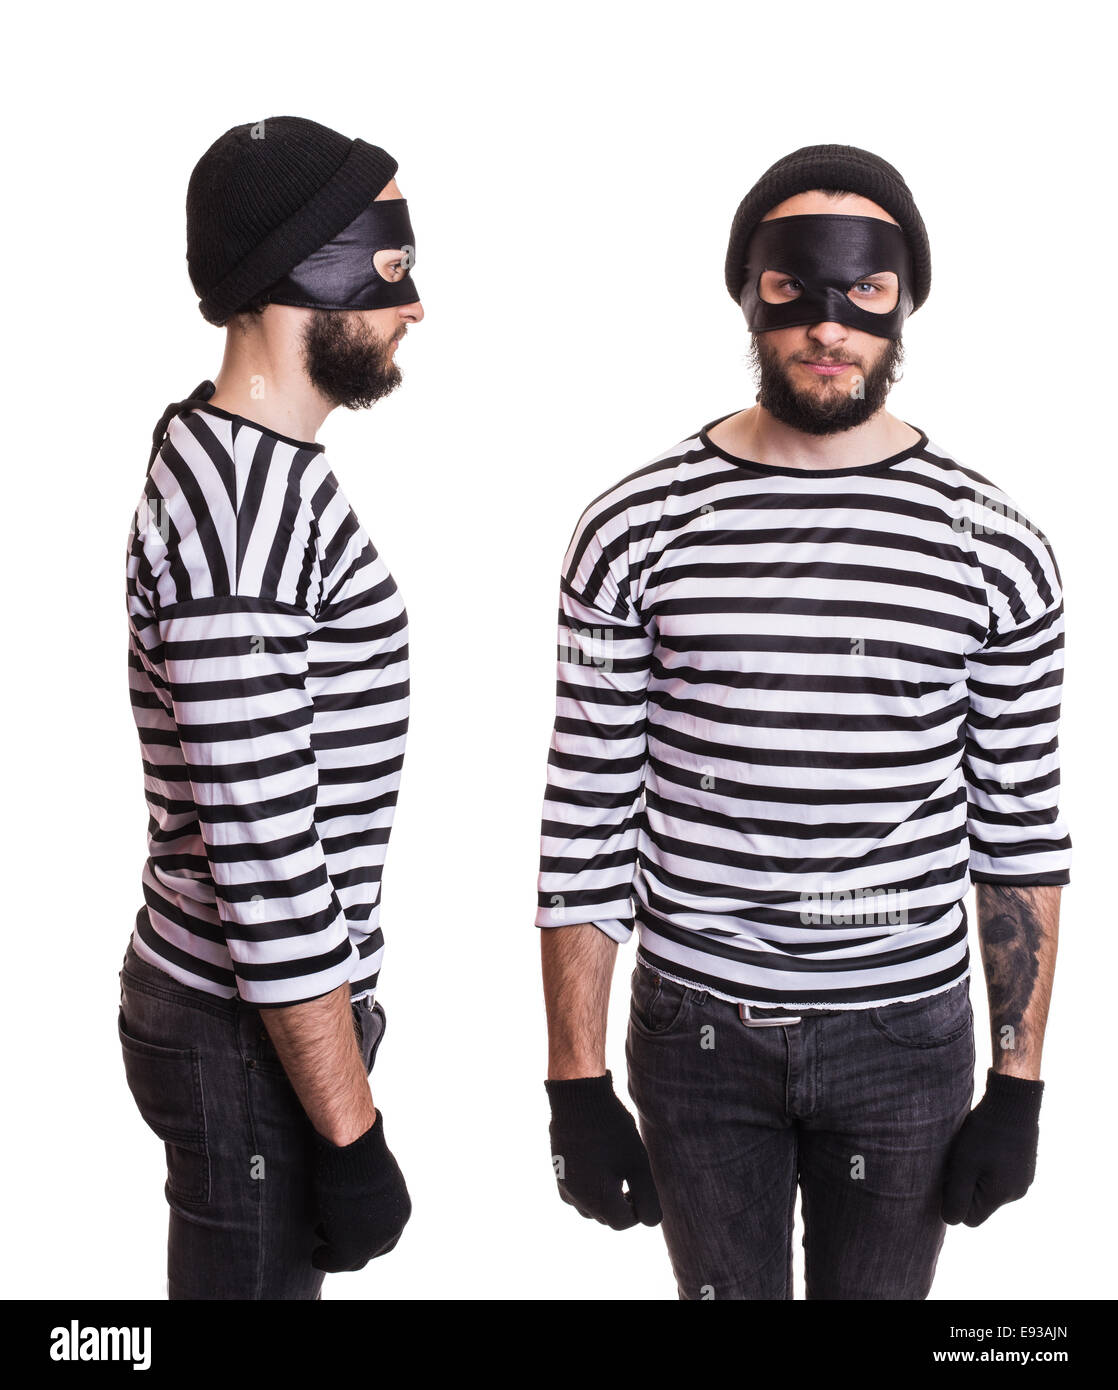 Thief stereotype. Front and side. Studio portrait isolated on white background Stock Photo